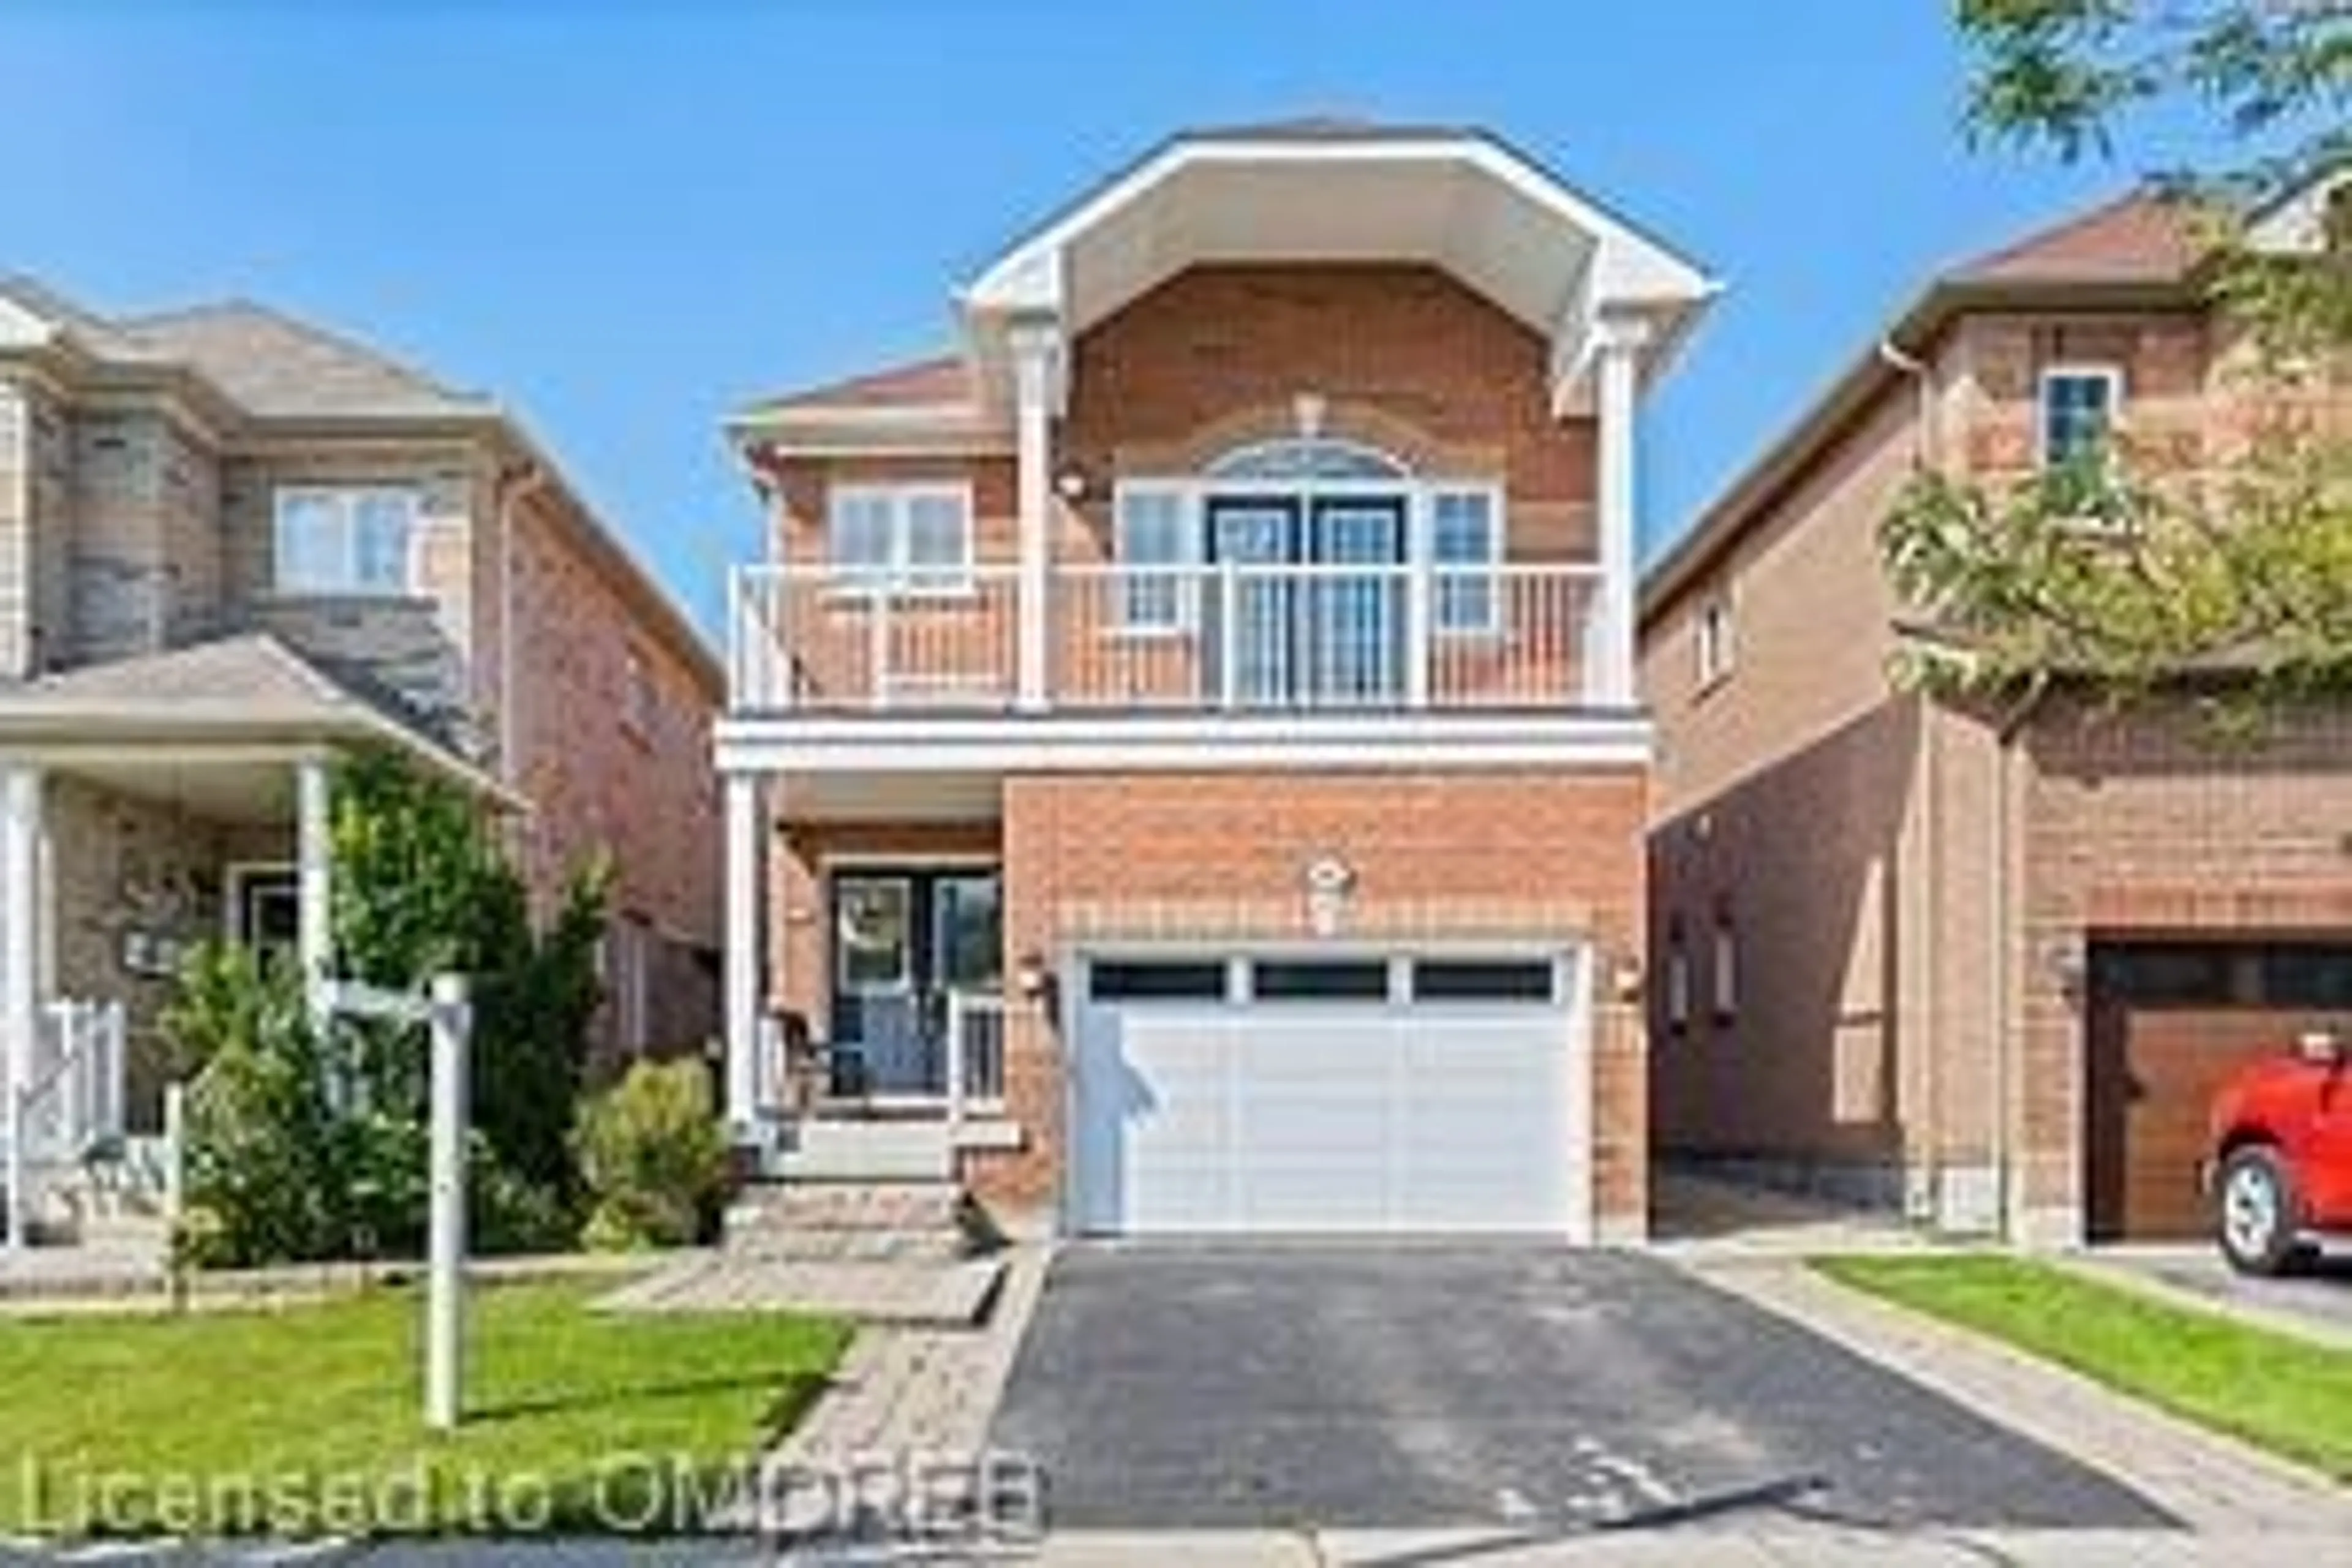 Home with brick exterior material for 48 Meadowlark Dr, Georgetown Ontario L7G 6N5